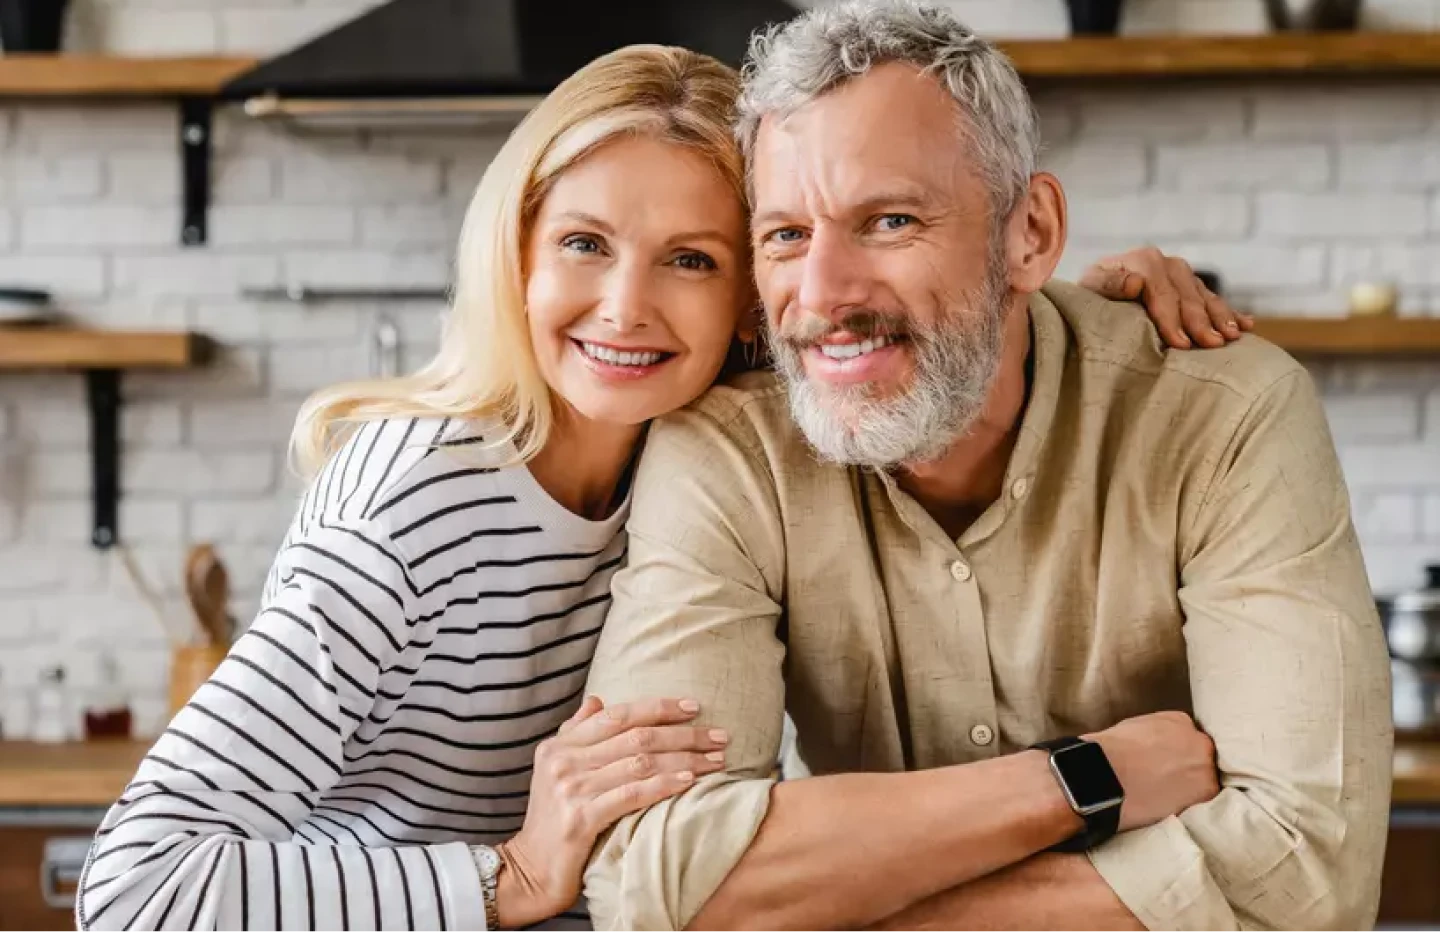 An Implant Dentures couple smile together in the kitchen. 